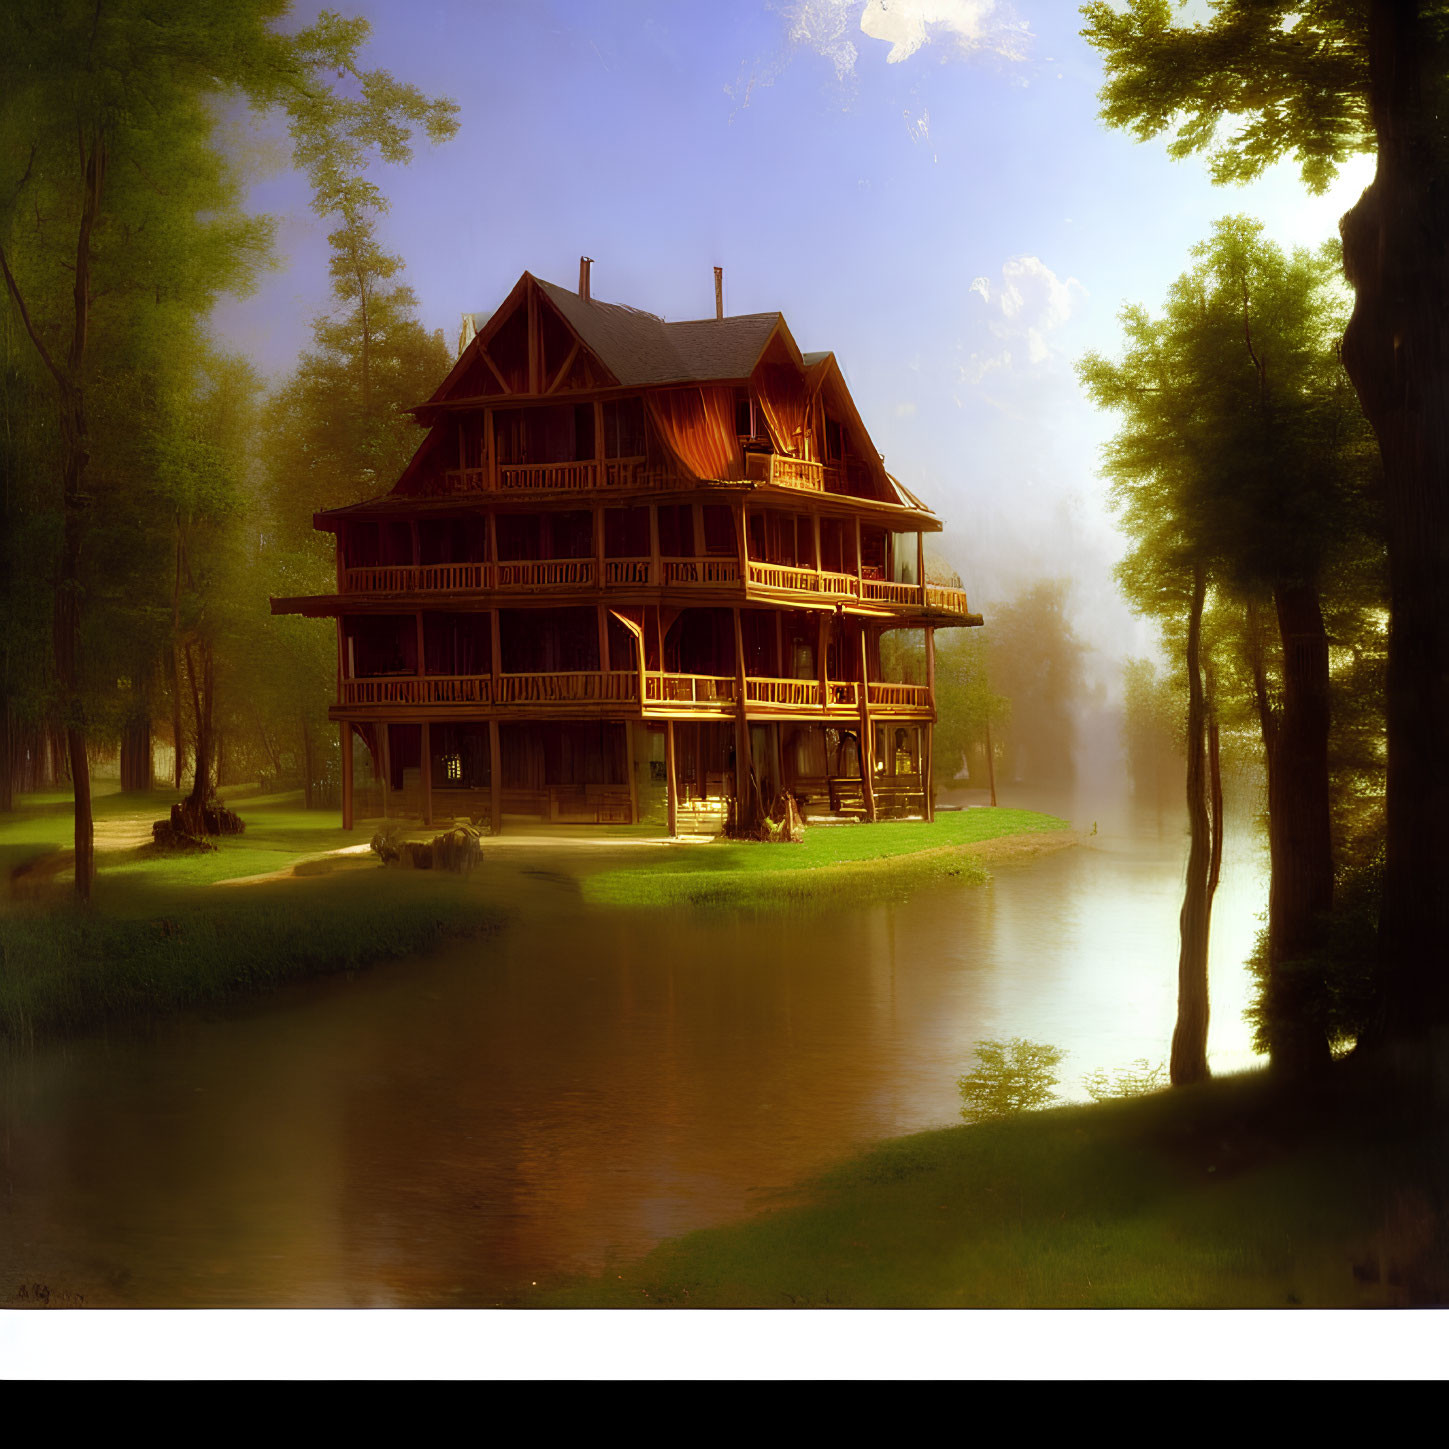 Large wooden house with balconies by river in misty setting